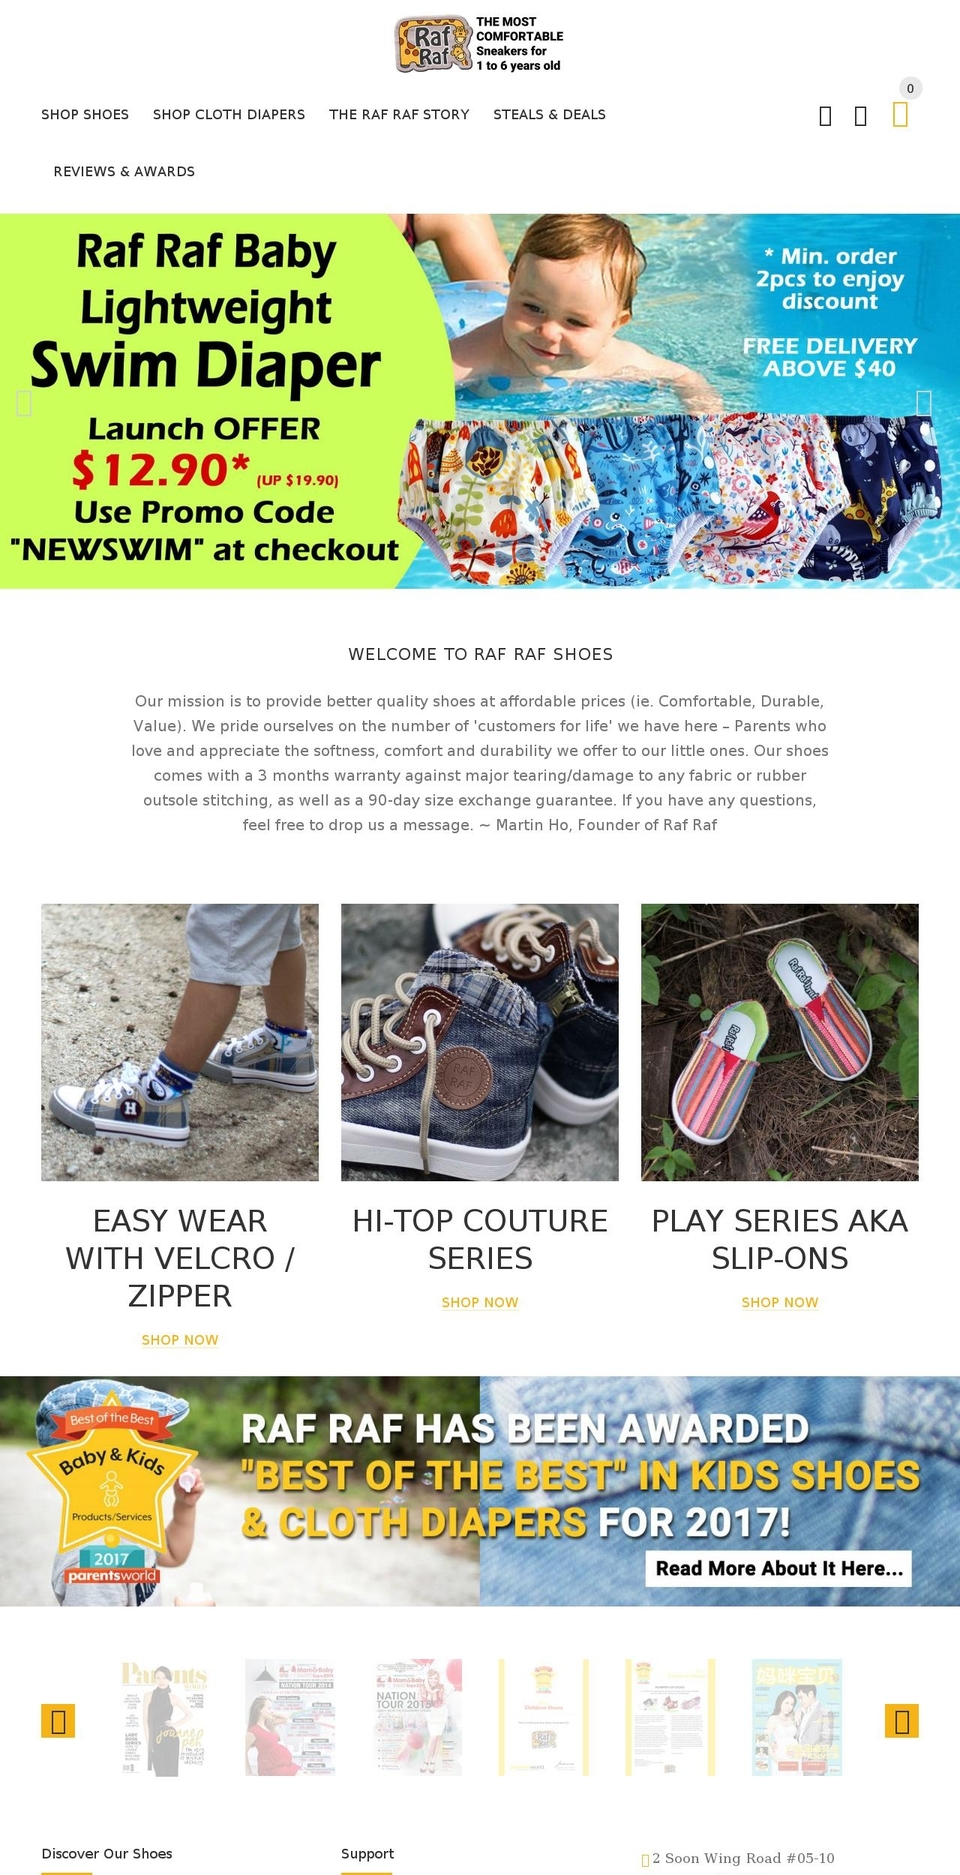 YourStore Shopify theme site example rafrafshoes.com